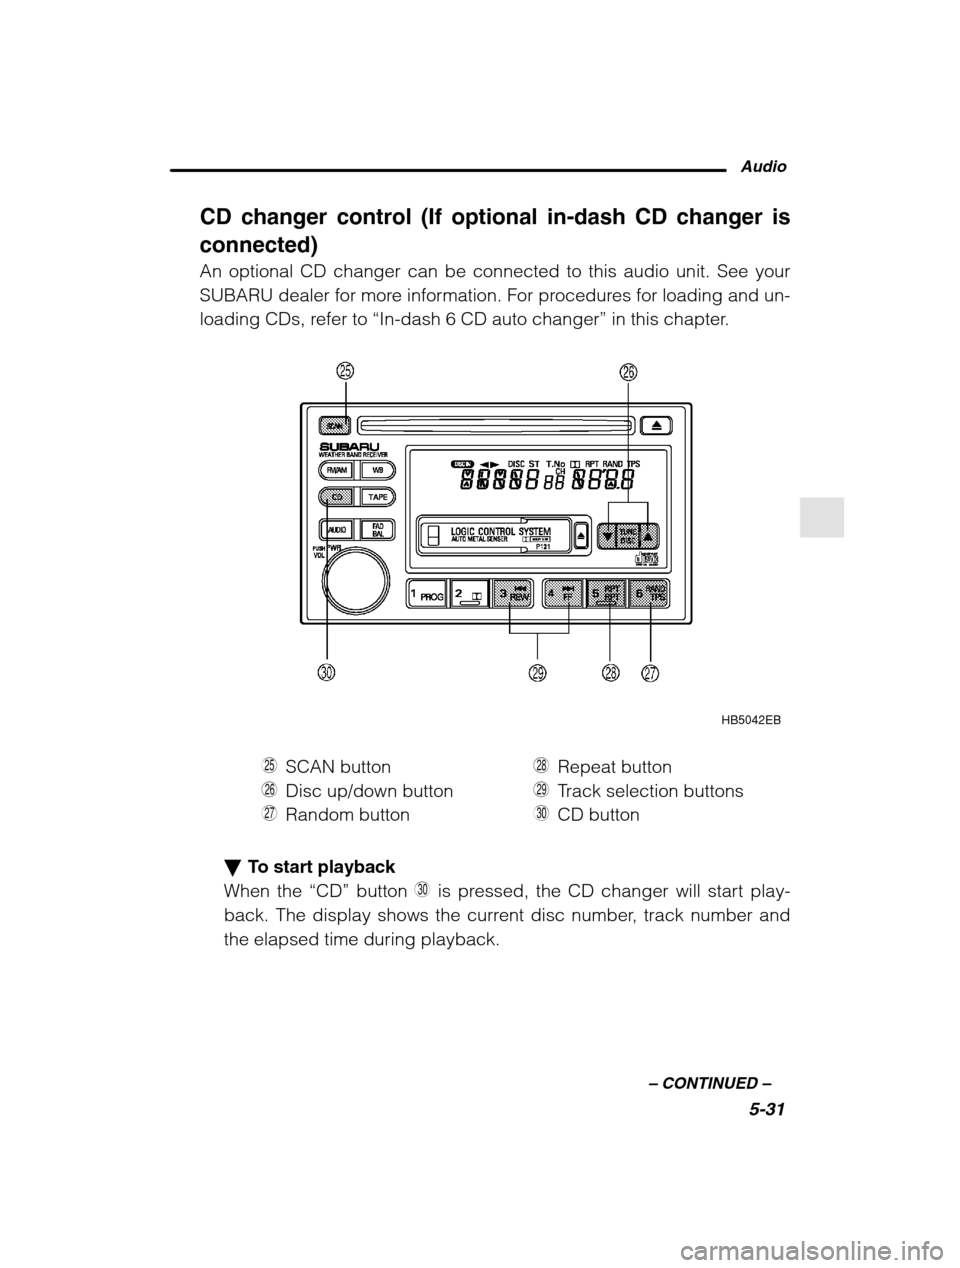 SUBARU OUTBACK 2002 3.G Owners Manual Audio5-31
–
 CONTINUED  –
CD changer control (If optional in-dash CD changer is connected) An optional CD changer can be connected to this audio unit. See your 
SUBARU dealer for more information.